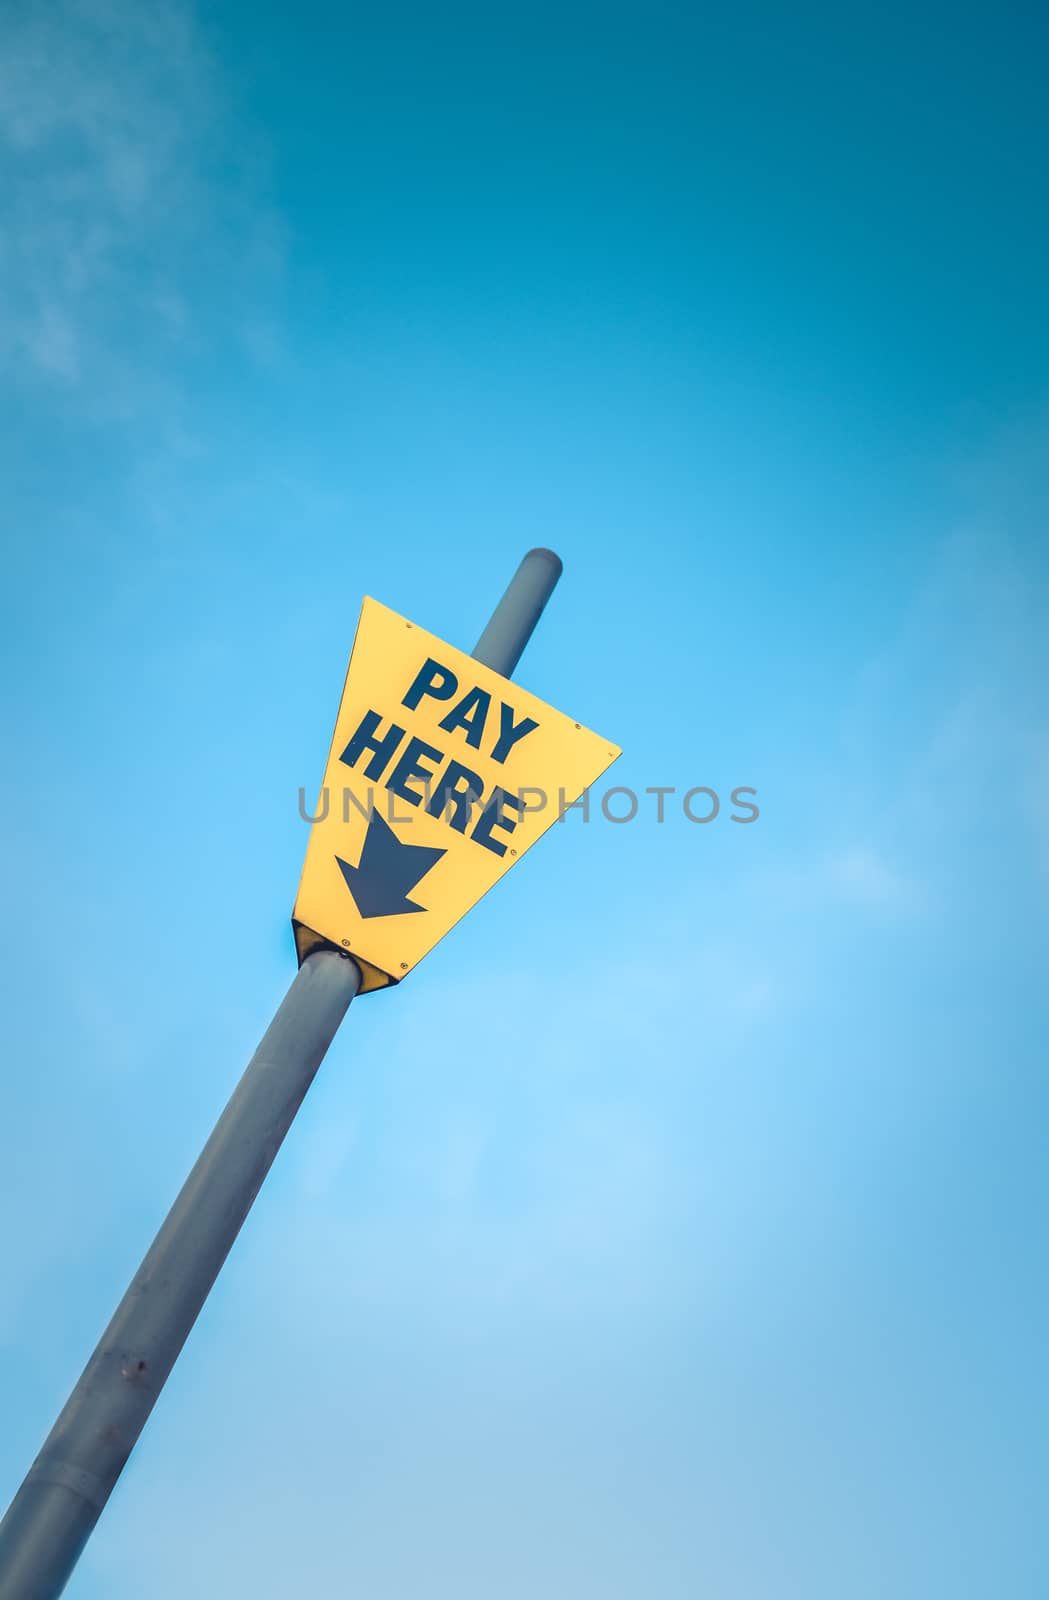 Conceptual Image Of A Bright Yellow Pay Here Sign Against A Blue Sky With Copy Space